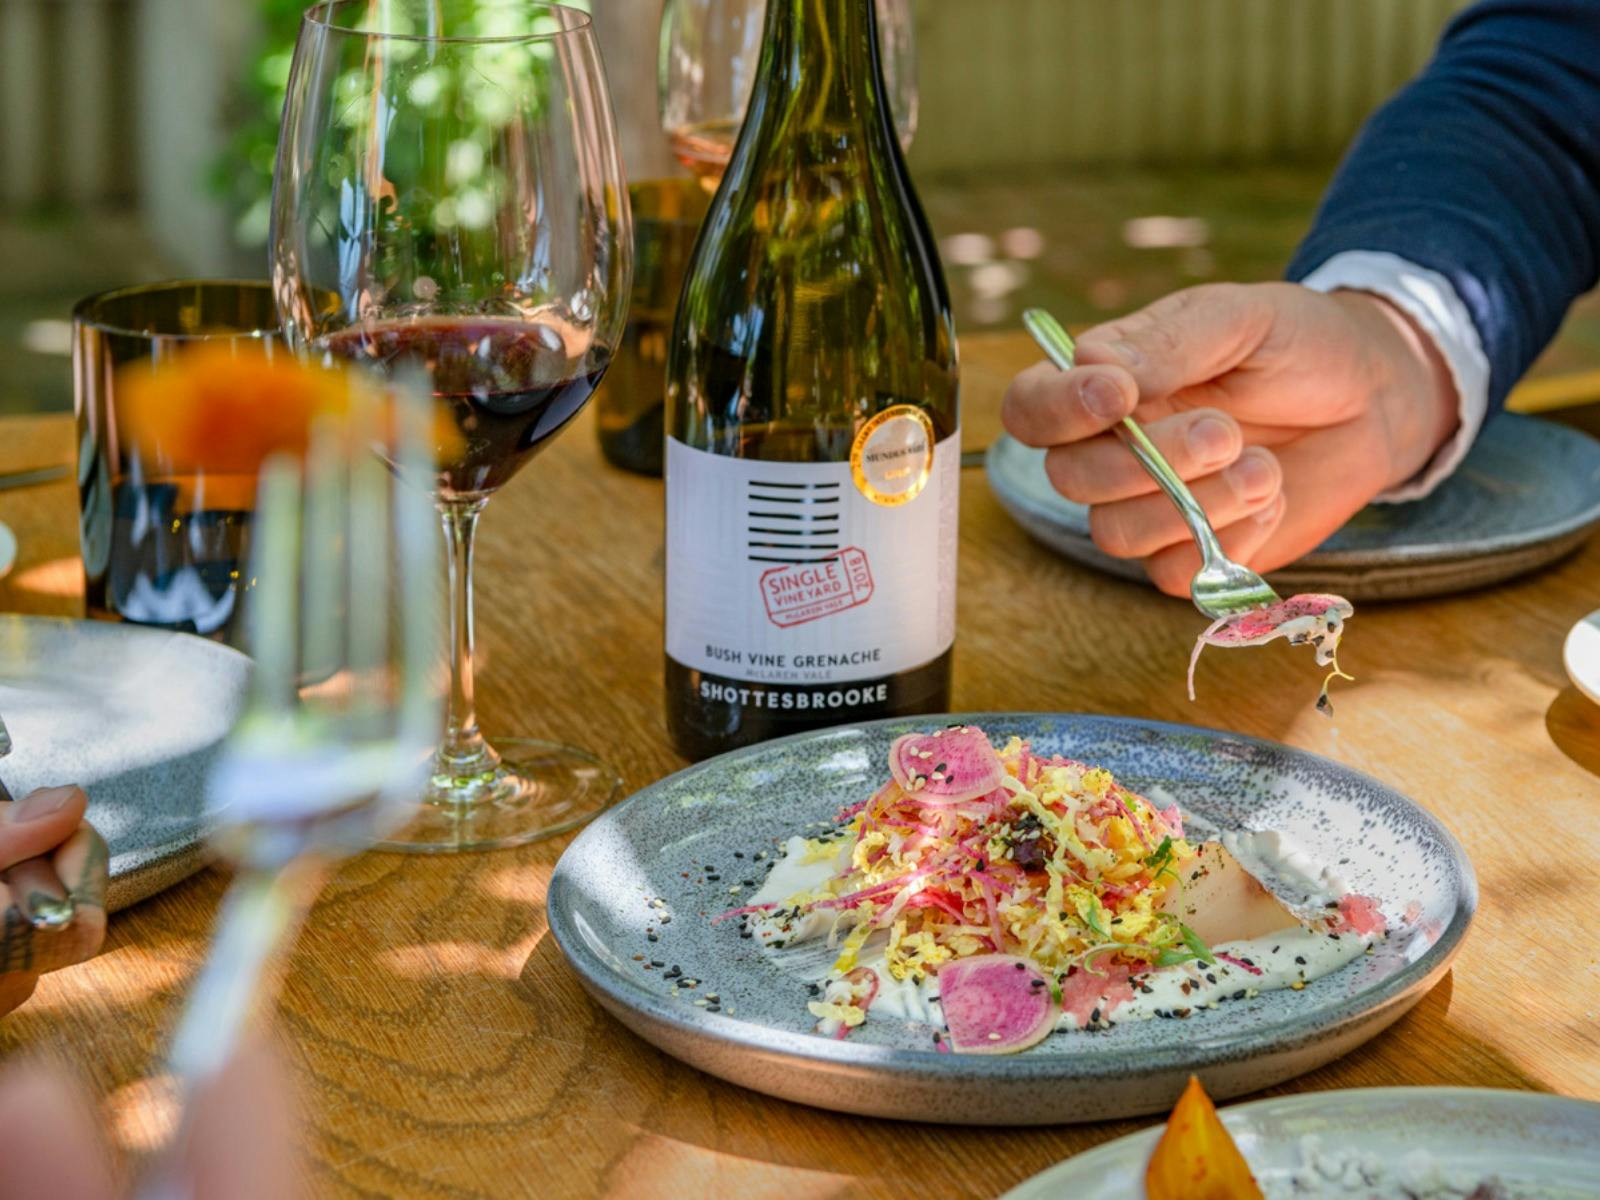 Outdoor dining is amplified by stunning dishes at The Currant Shed